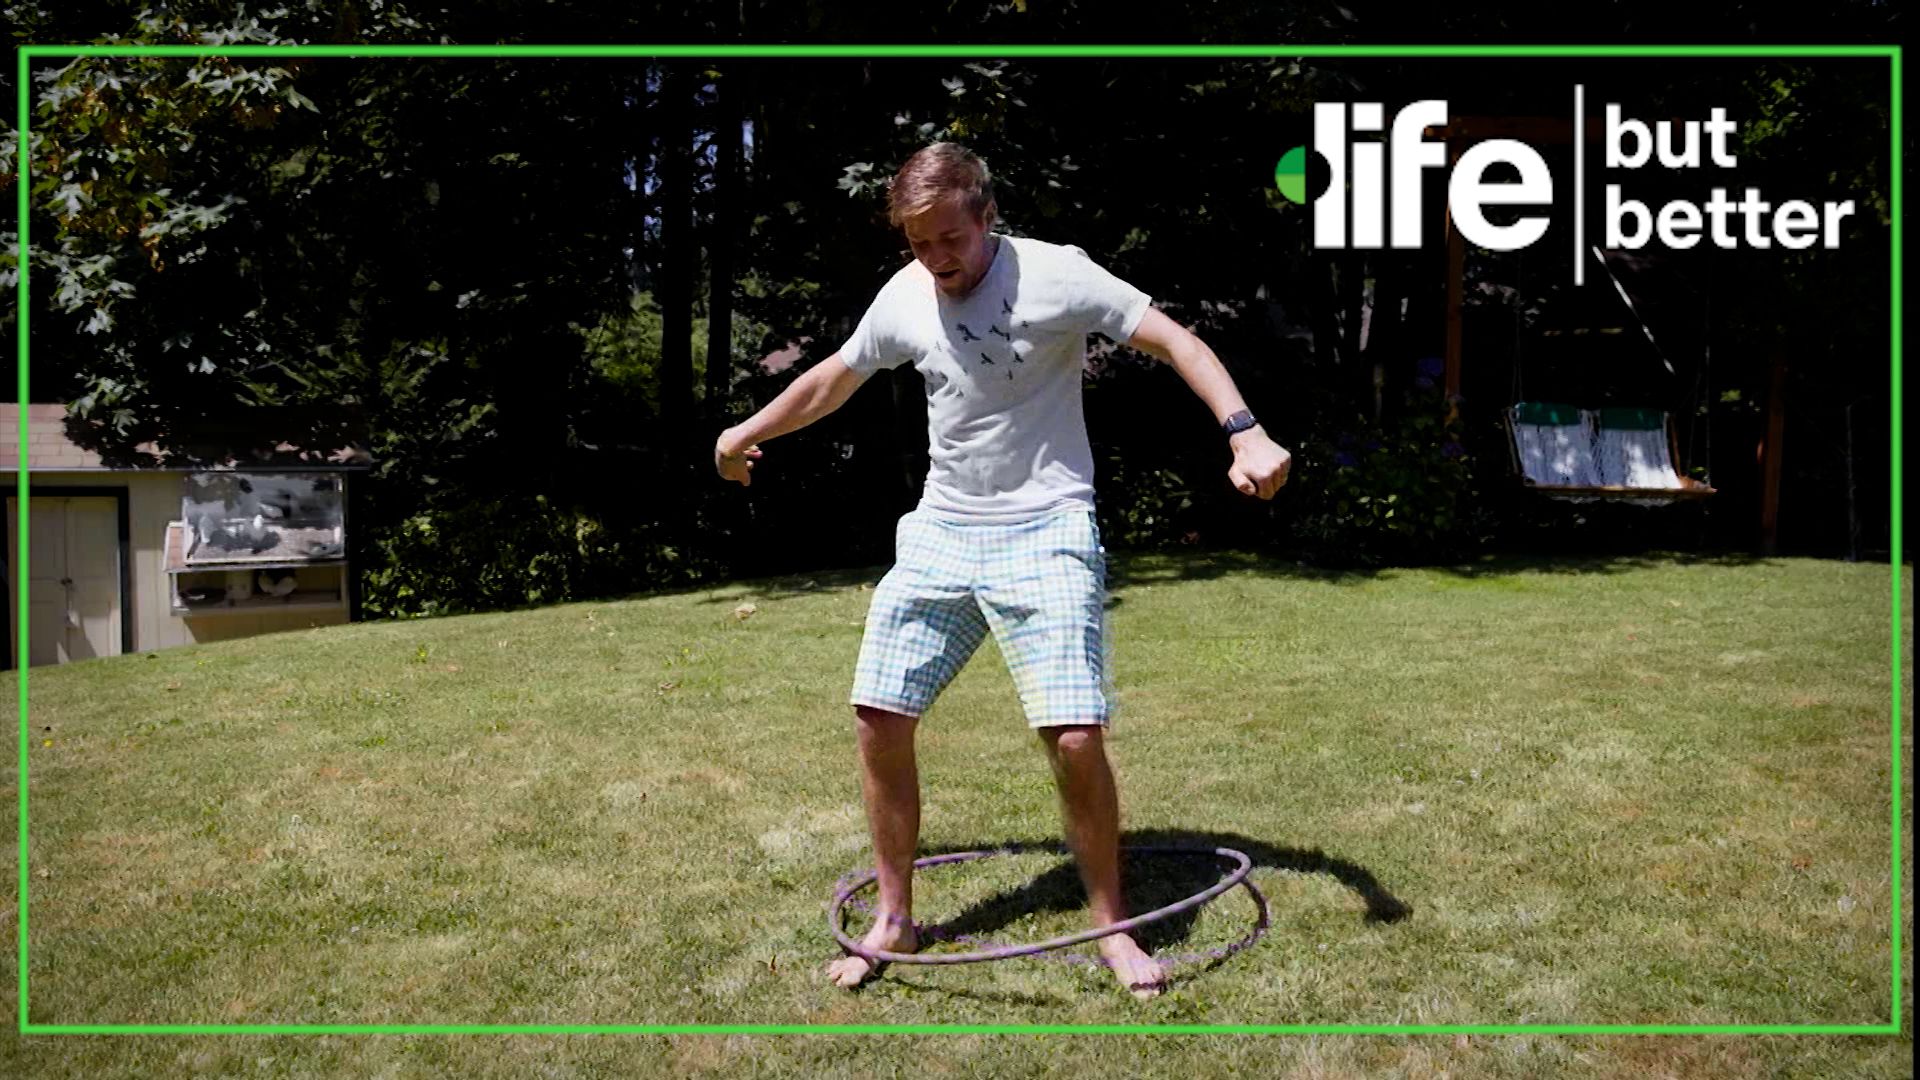 Hula hooping is total fitness for the mind and body